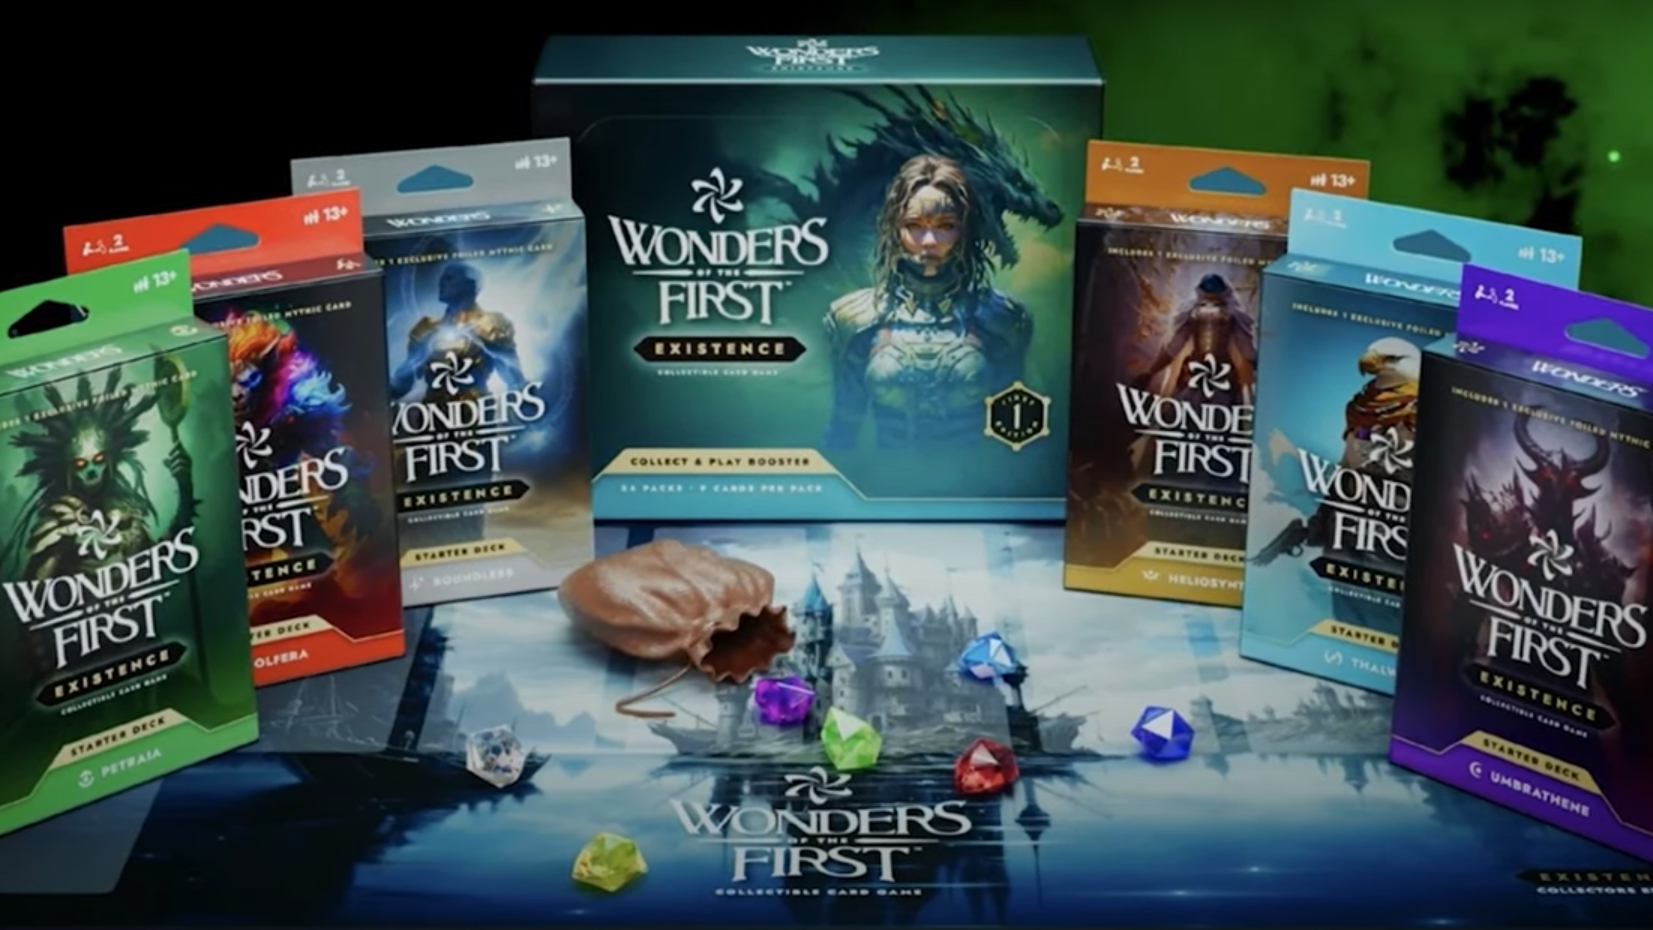 Artificial product, artificial hype: the saga of Wonders of the First’s AI art and NFT-powered CCG